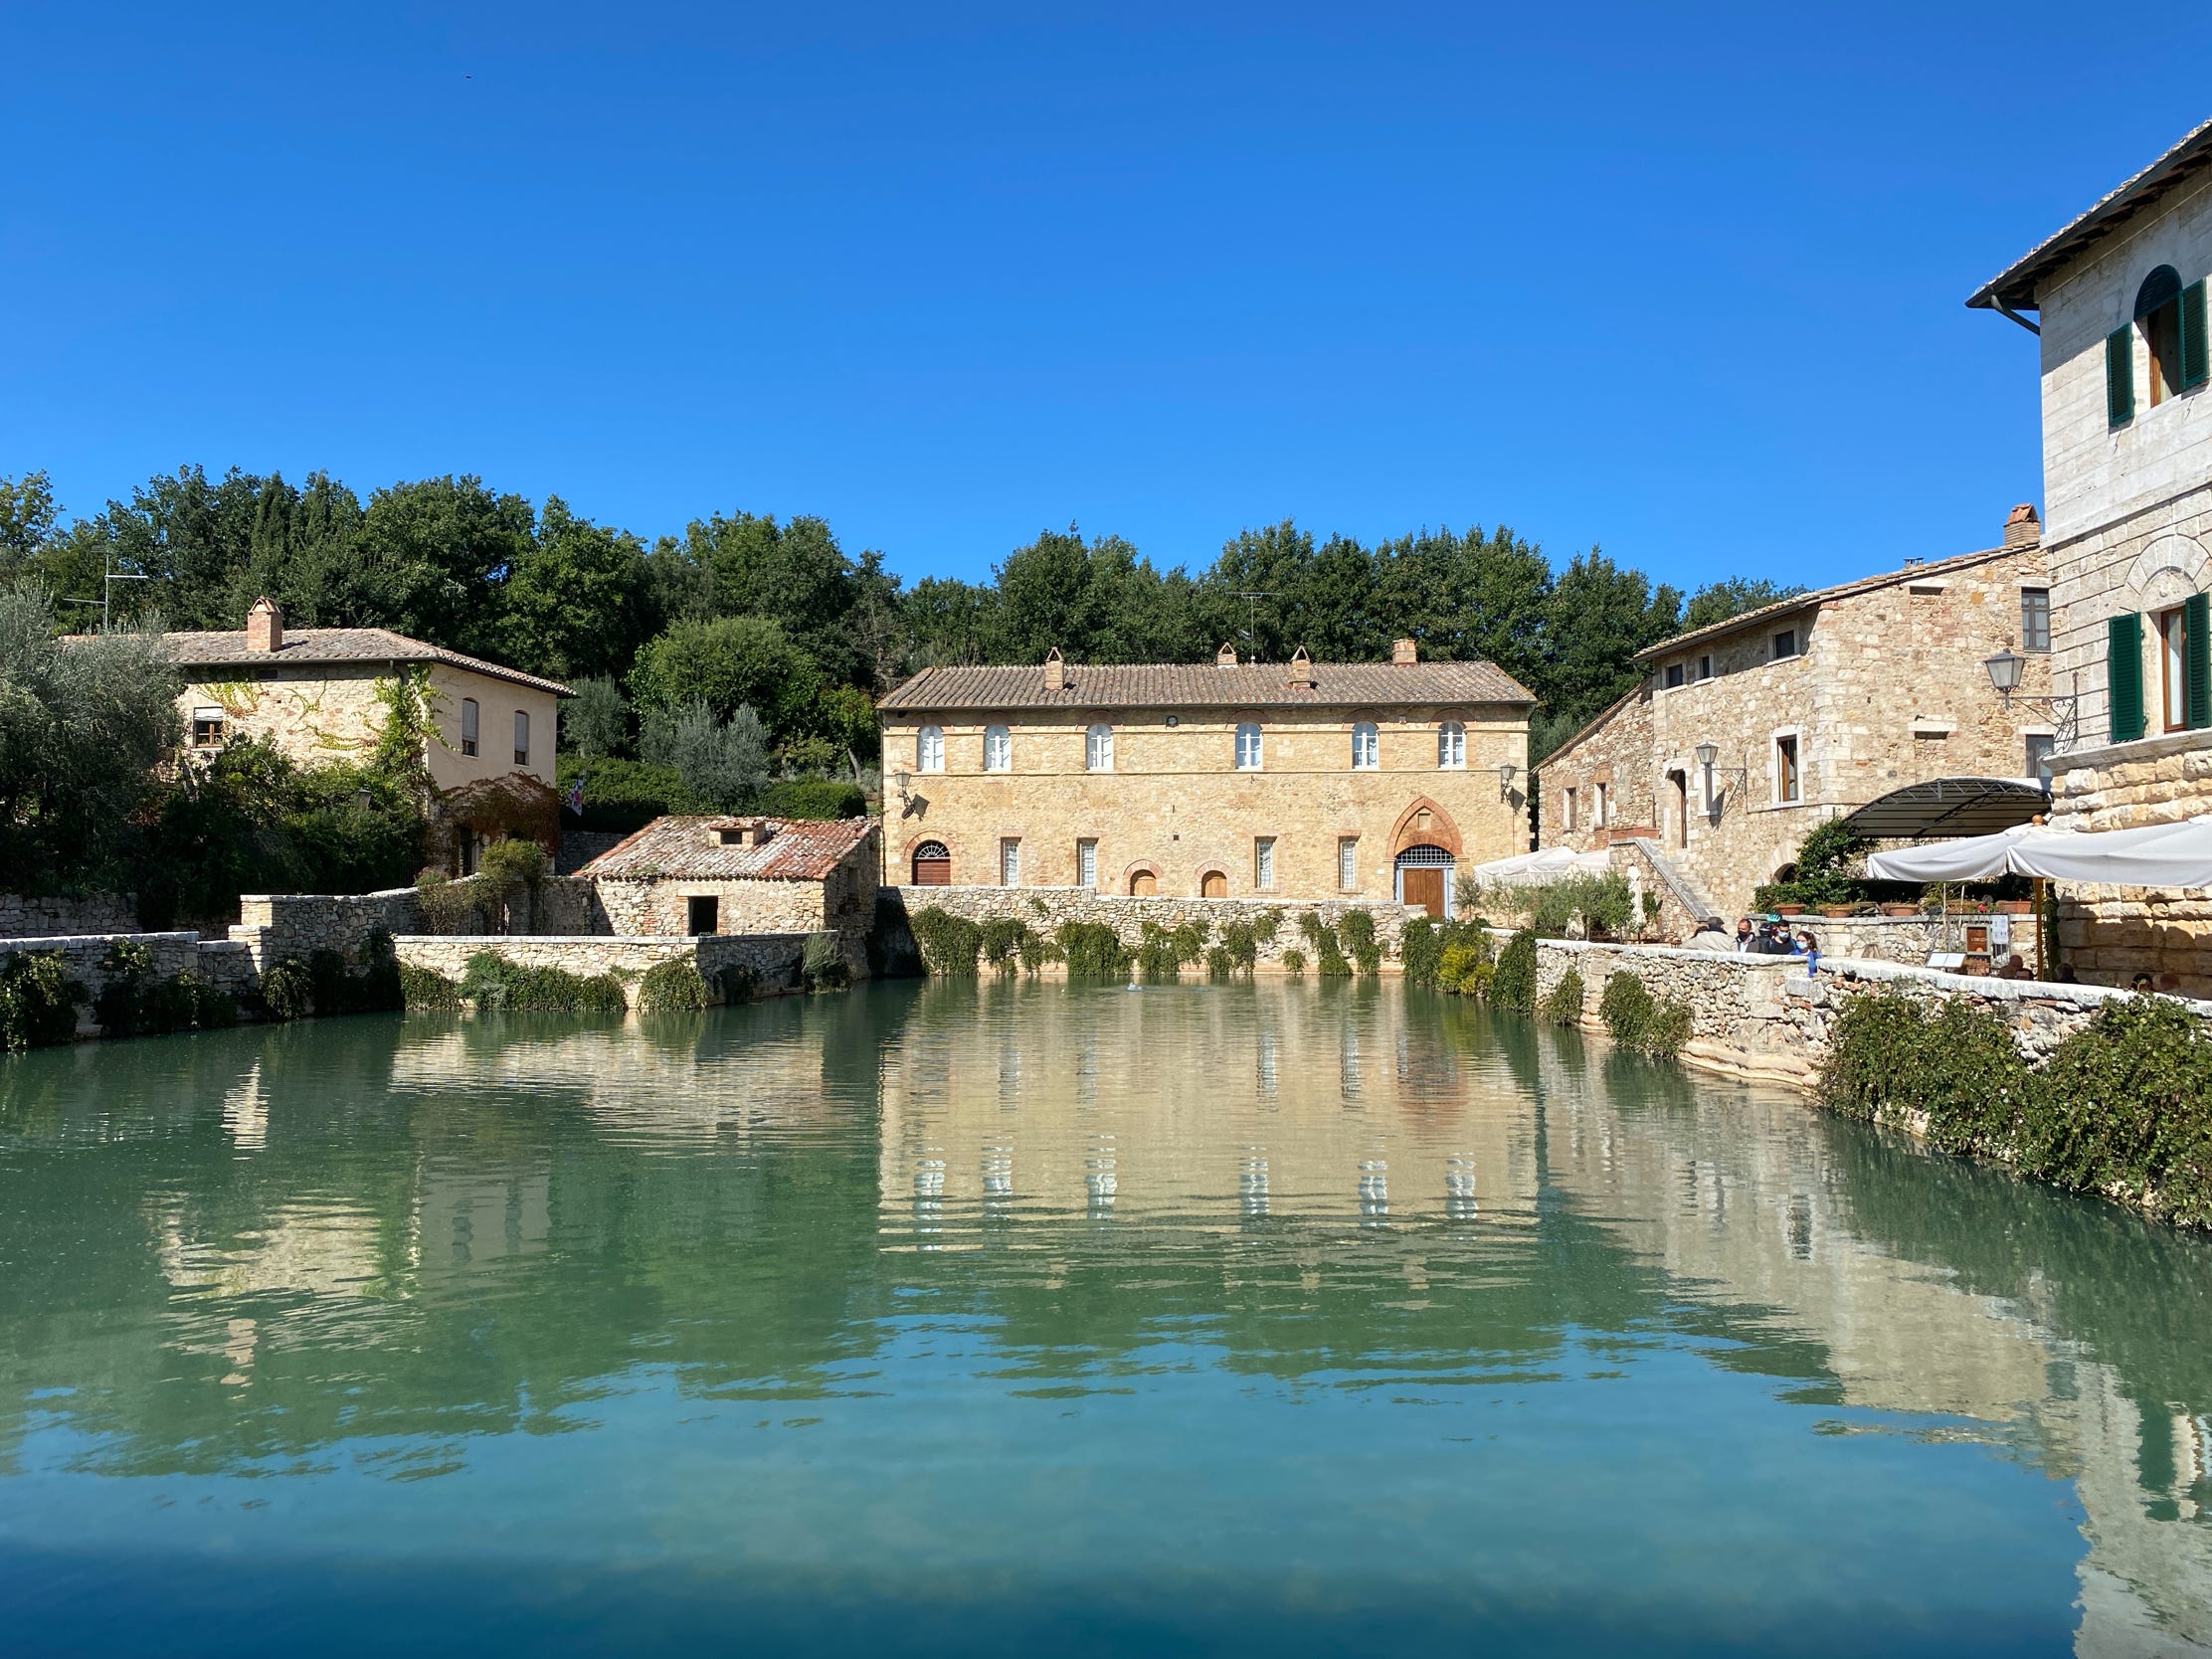 The cozy medieval hamlet of Bagno Vignoni, built all around a thermal water pool